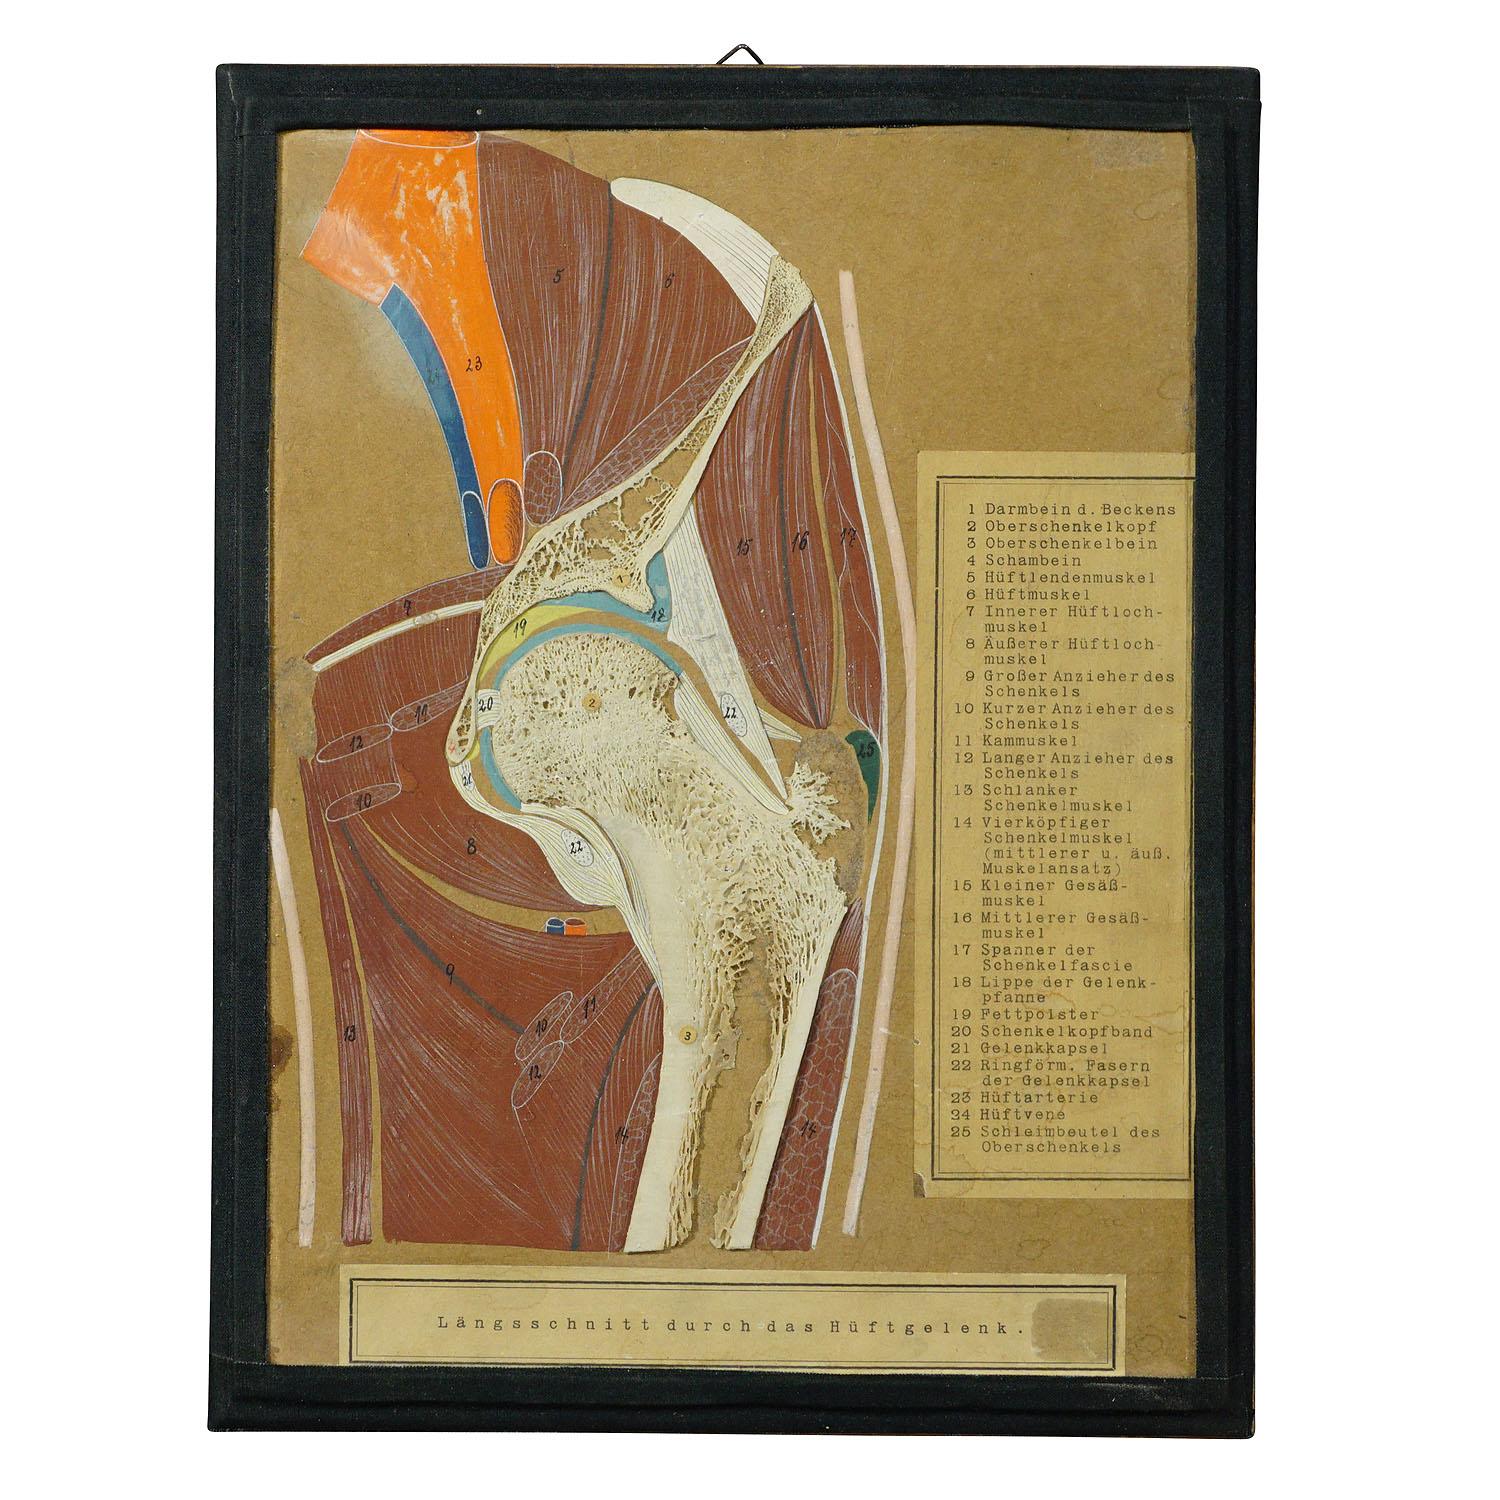 An antique demonstration model of a longitudinal bone cut of the human hip joint. Genuine bone mounted on cardboard with handpainted structure of muscles and tendons. With German explanation. Published by Hermann Eppler, Lehrmittelanstalt Rudolstadt